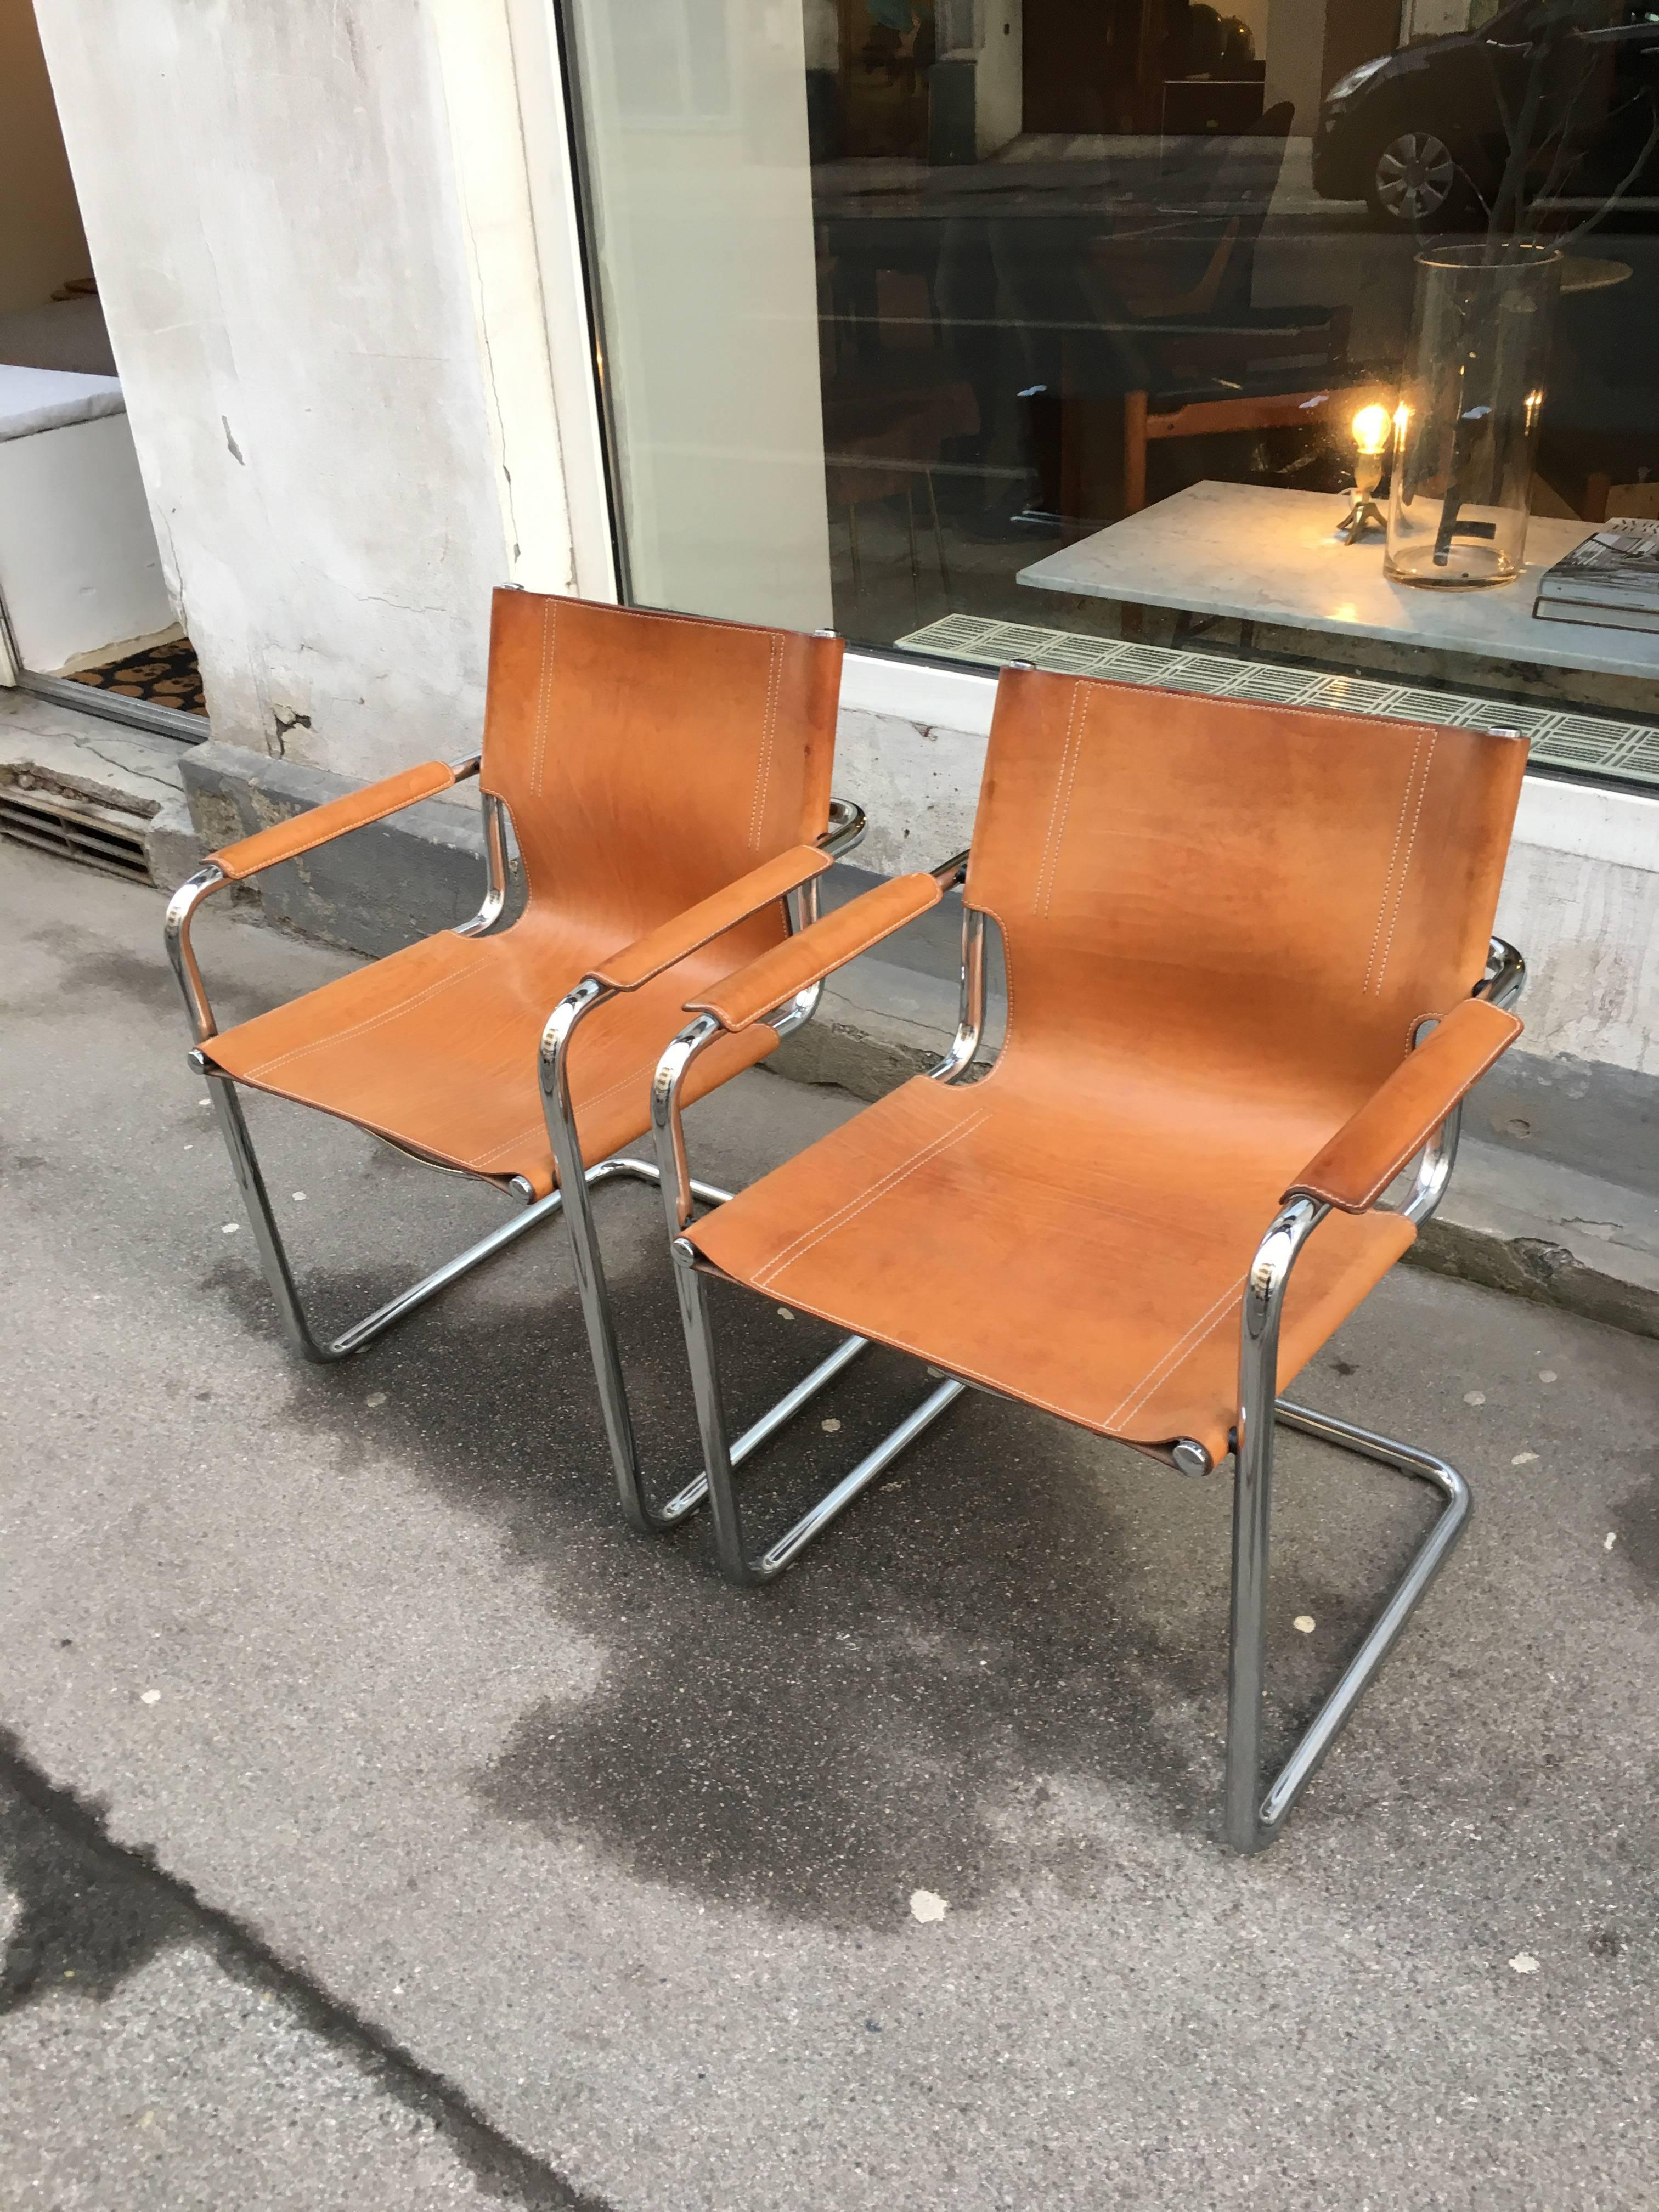 Fine pair of Italian leather Matteo Grassi visitor chairs. Desirably patinated in a gorgeous cognac colored Italian leather. Embossed marked on the back of each chair Matteo Grassi. The chairs are perfect vintage condition with just the right amount